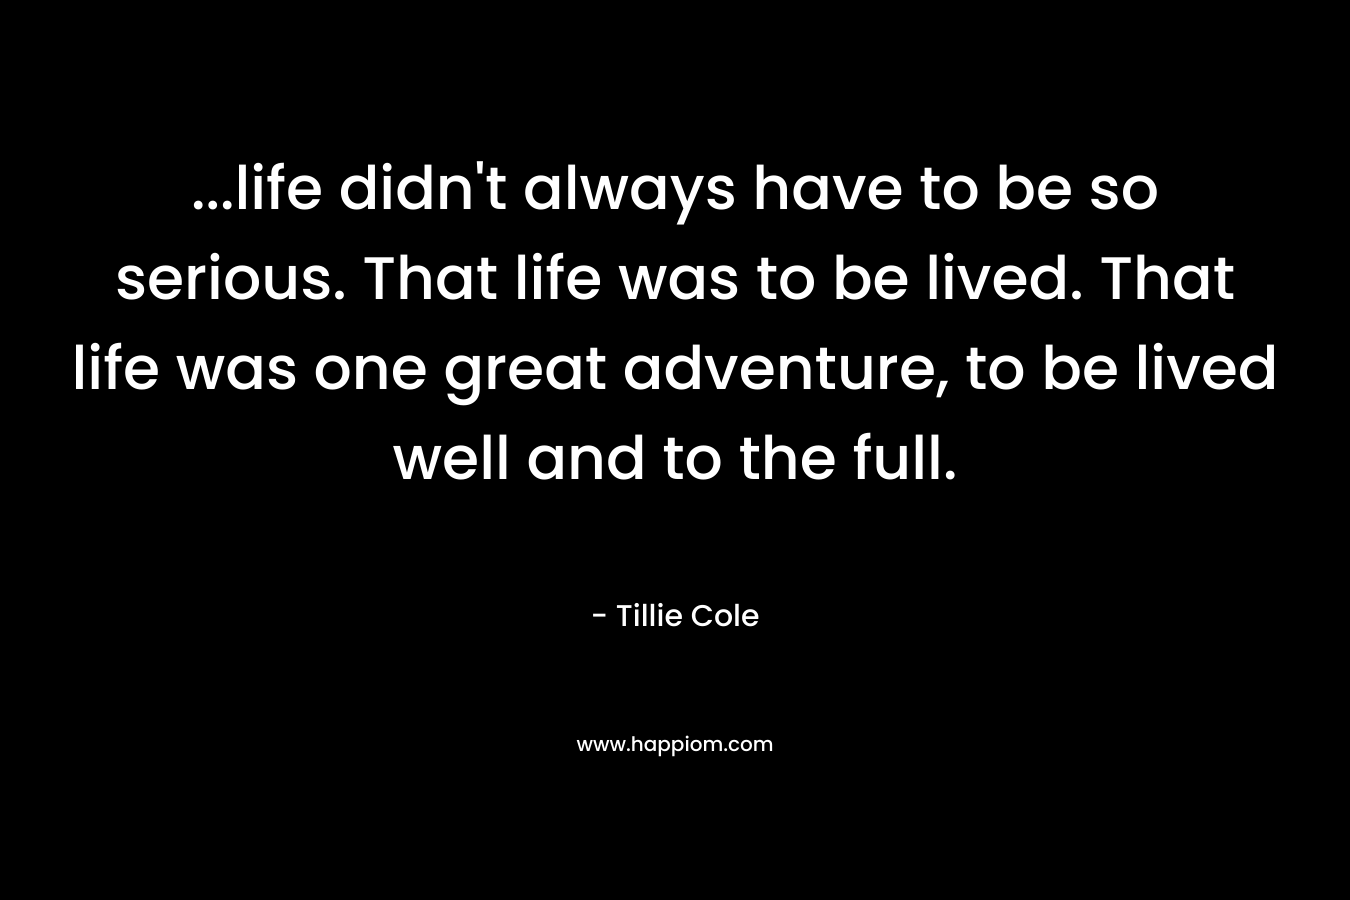 ...life didn't always have to be so serious. That life was to be lived. That life was one great adventure, to be lived well and to the full.